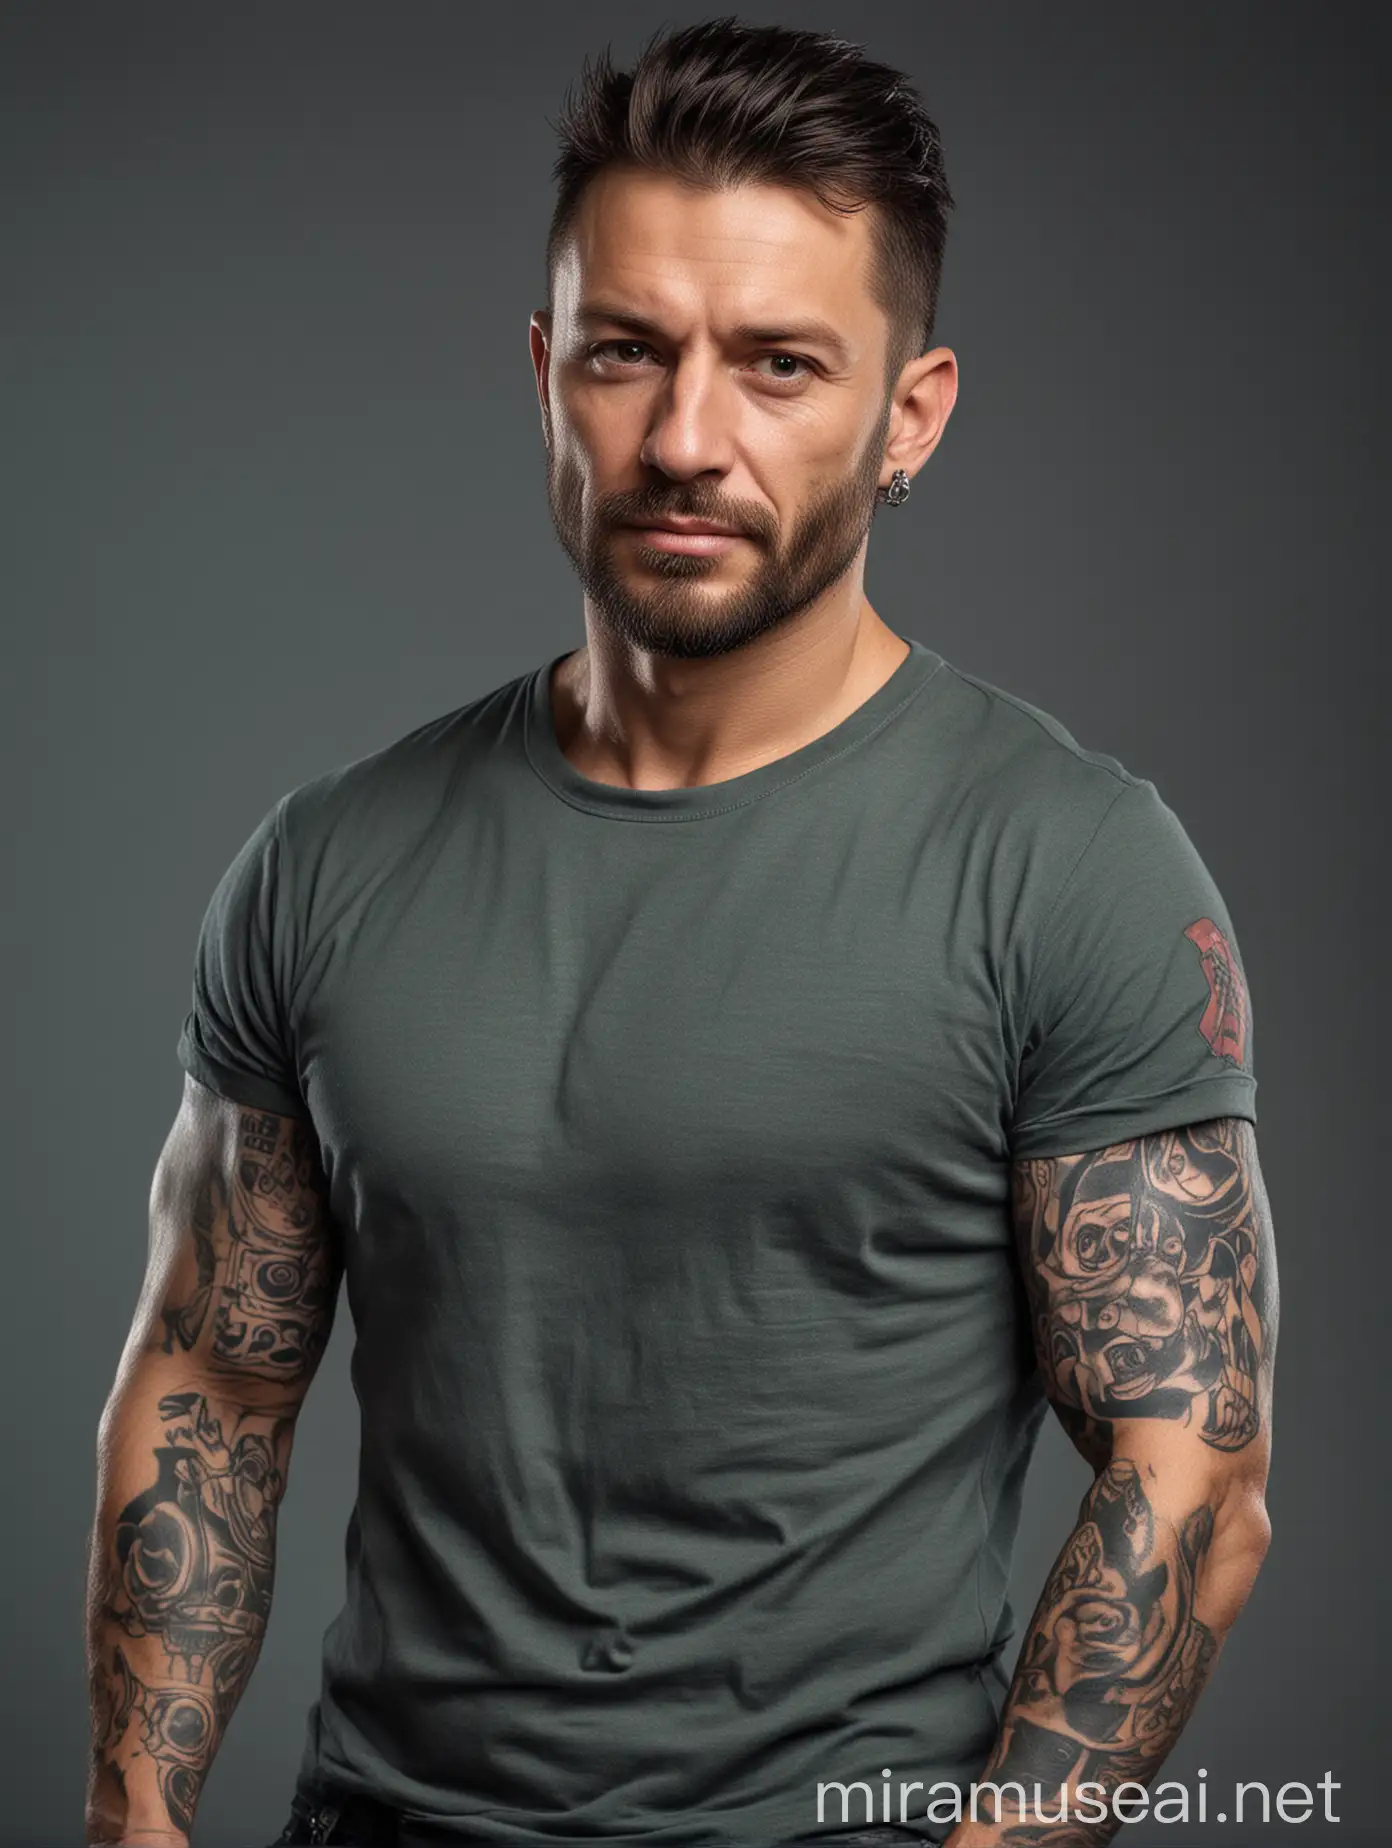 Strong Masculine Man with Tattoos and Casual Attire